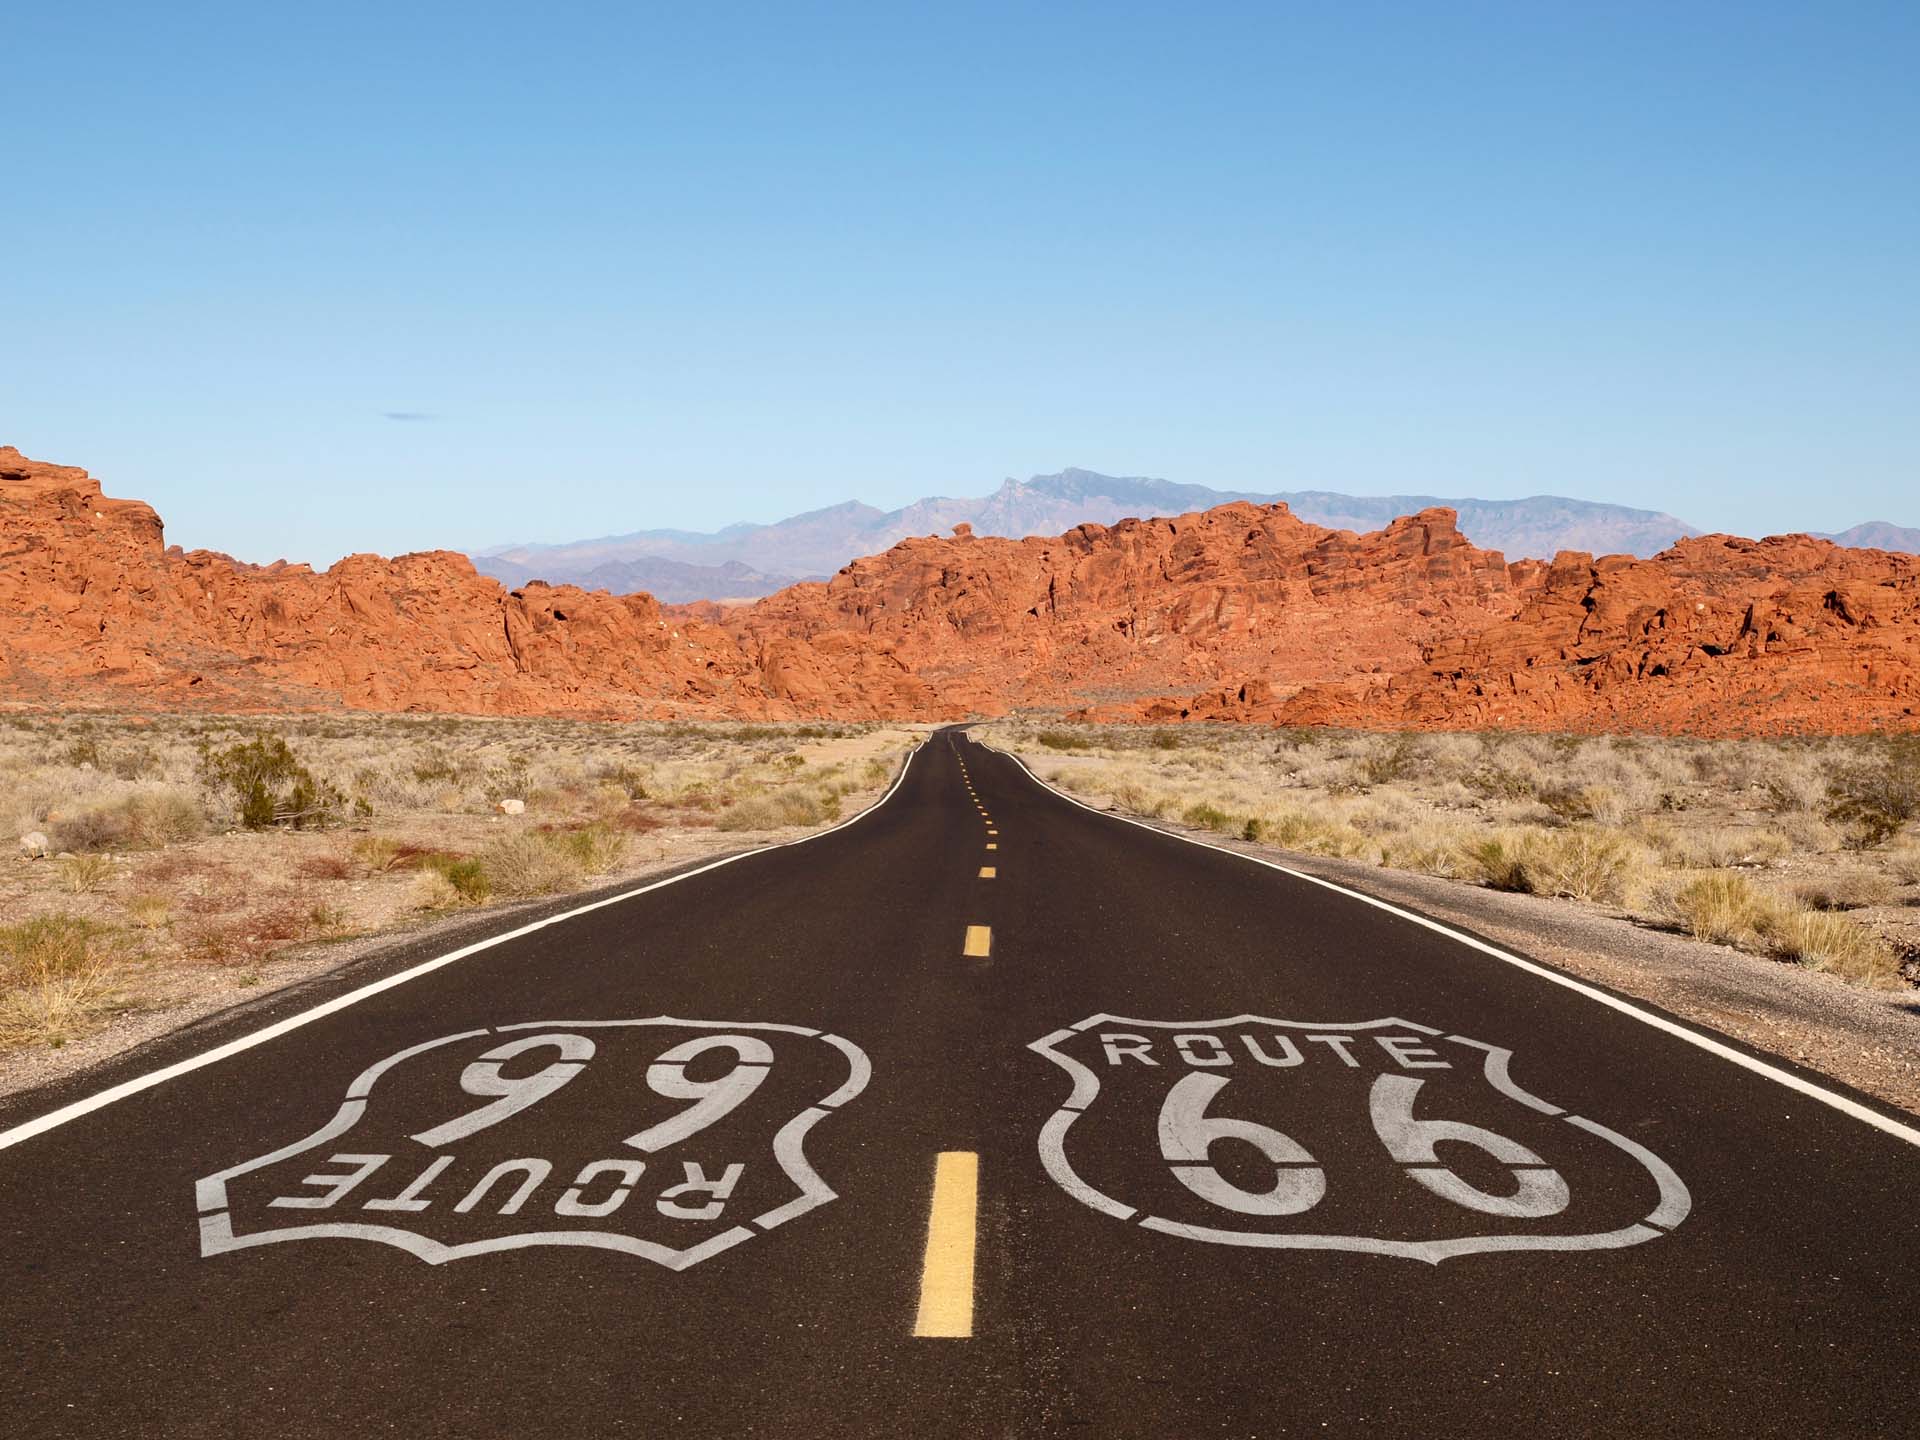 A long road stretching off into the distance with far off dessert mountains, and the iconic symbol of Route 66 on the tarmac